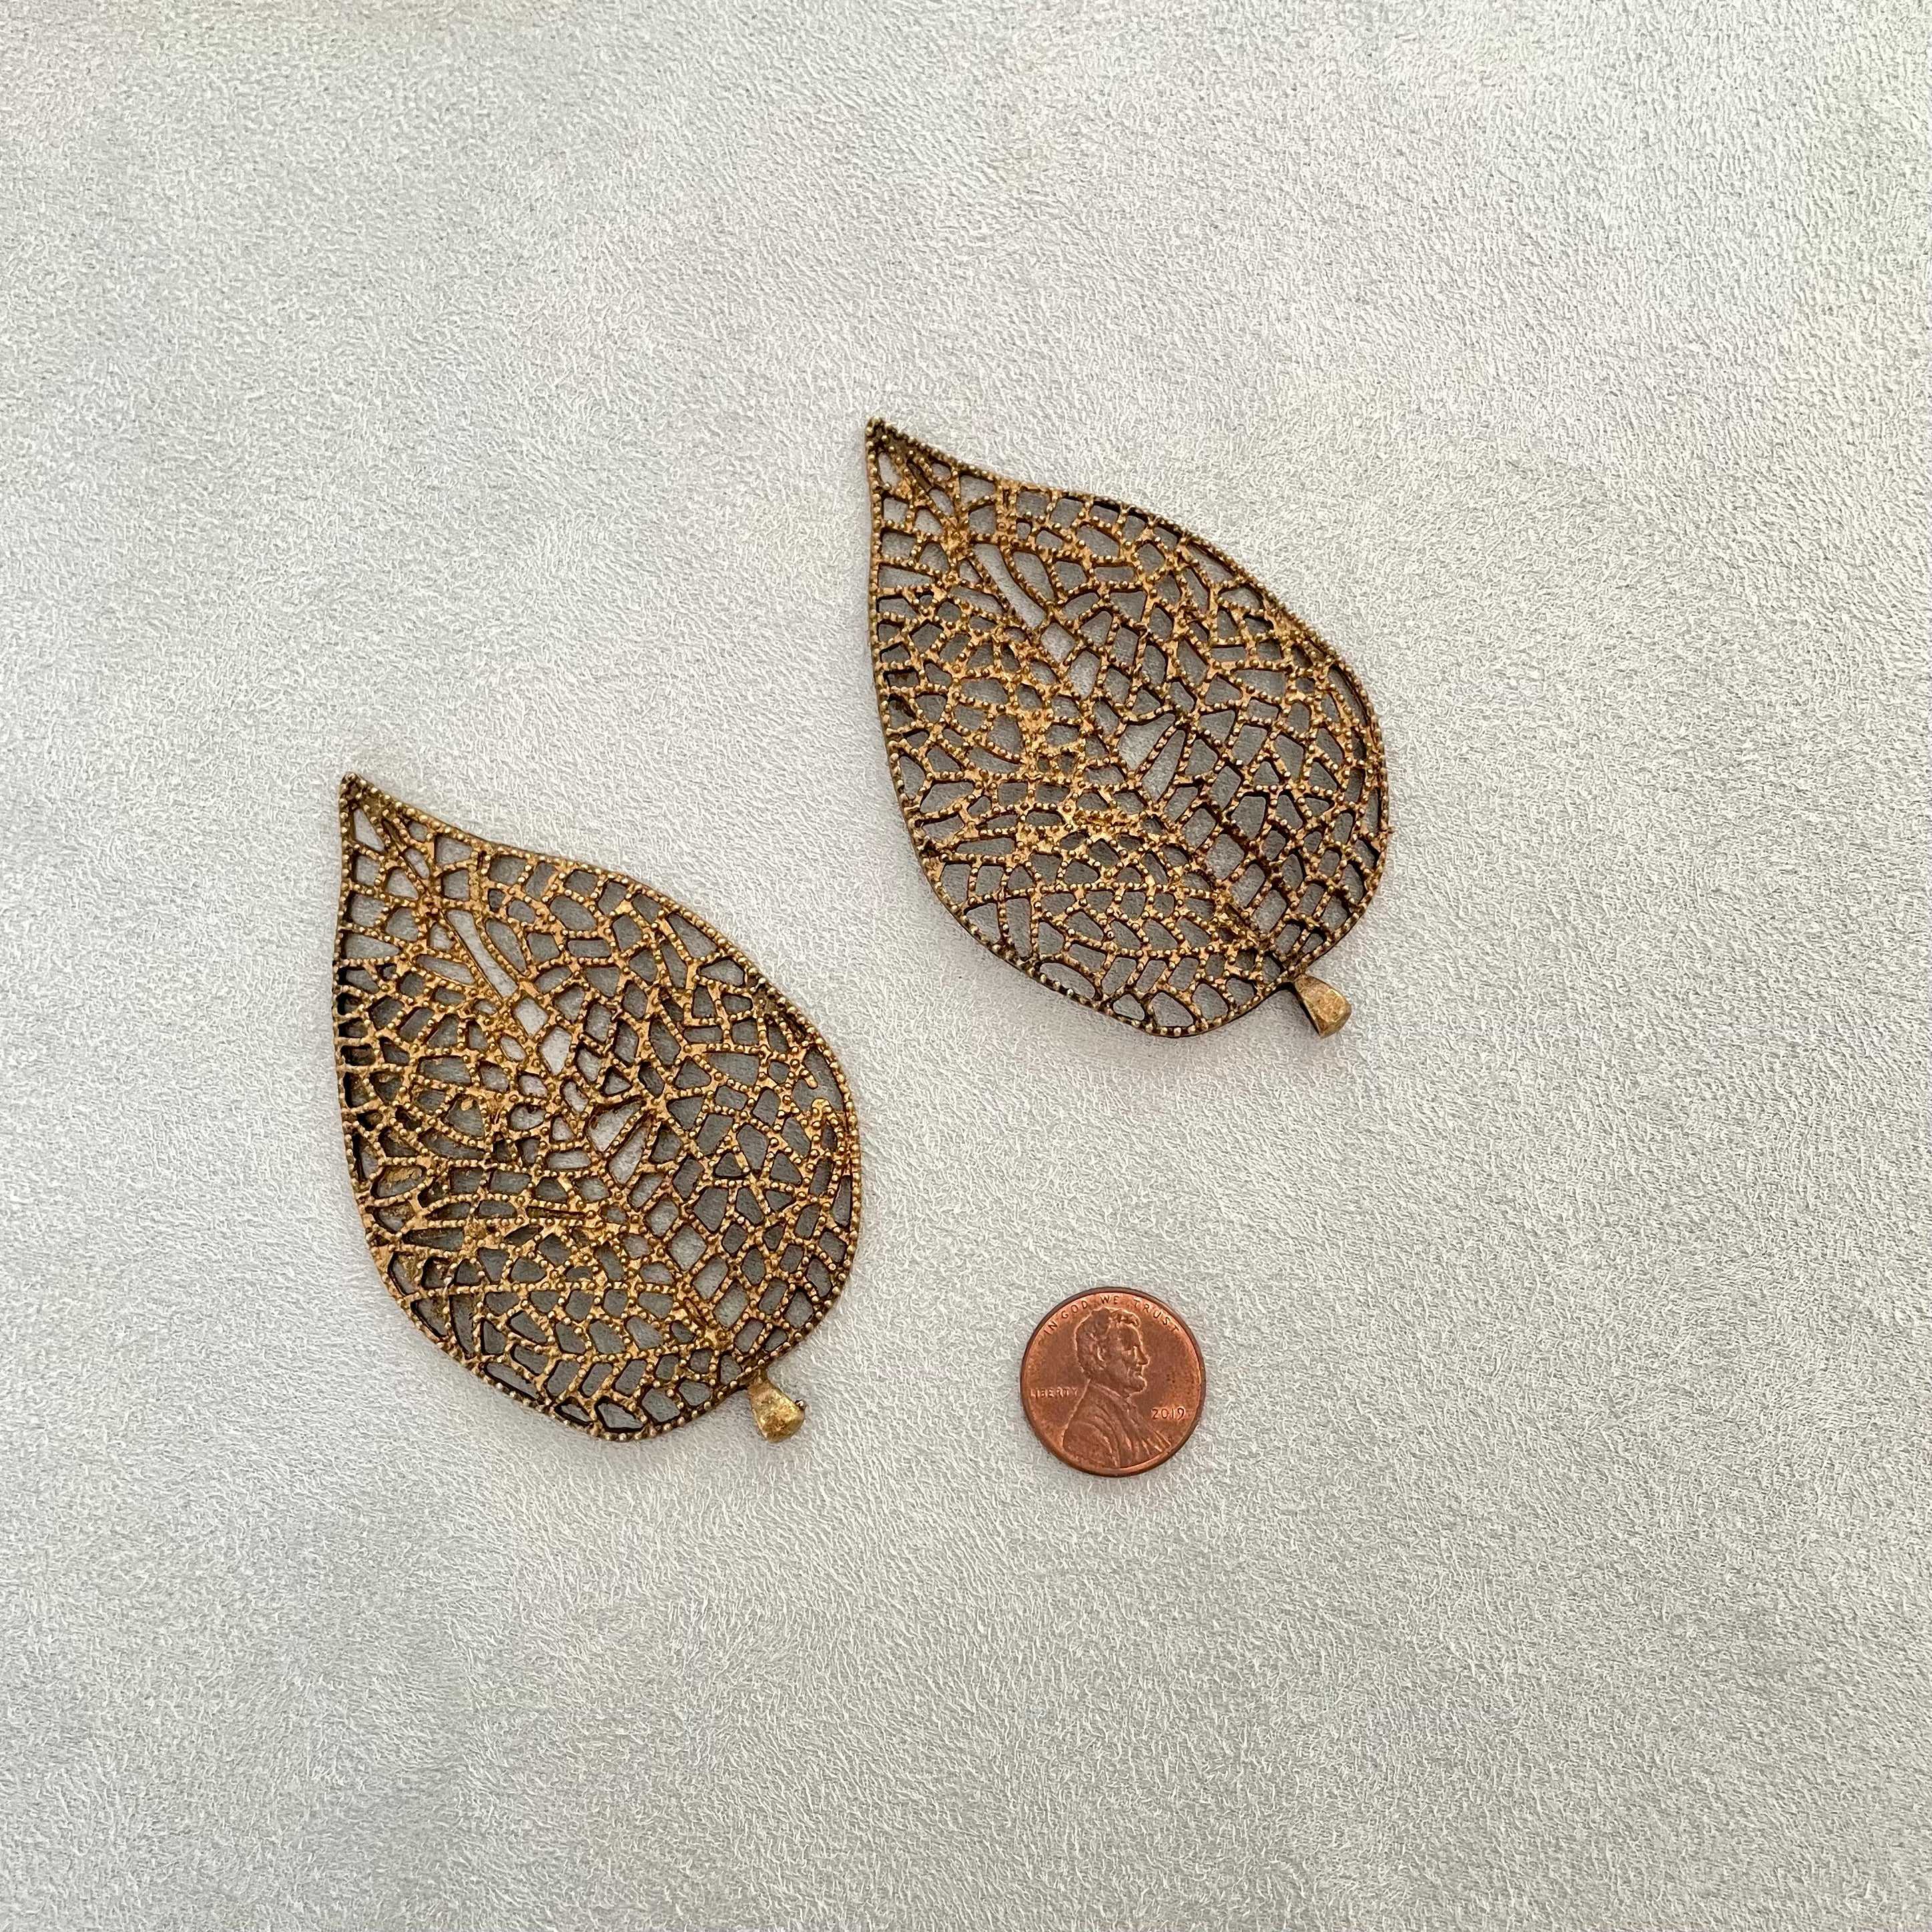  2 Large Coco Bronze metal leaves, penny beside for size reference - flat lay props from Champagne & GRIT